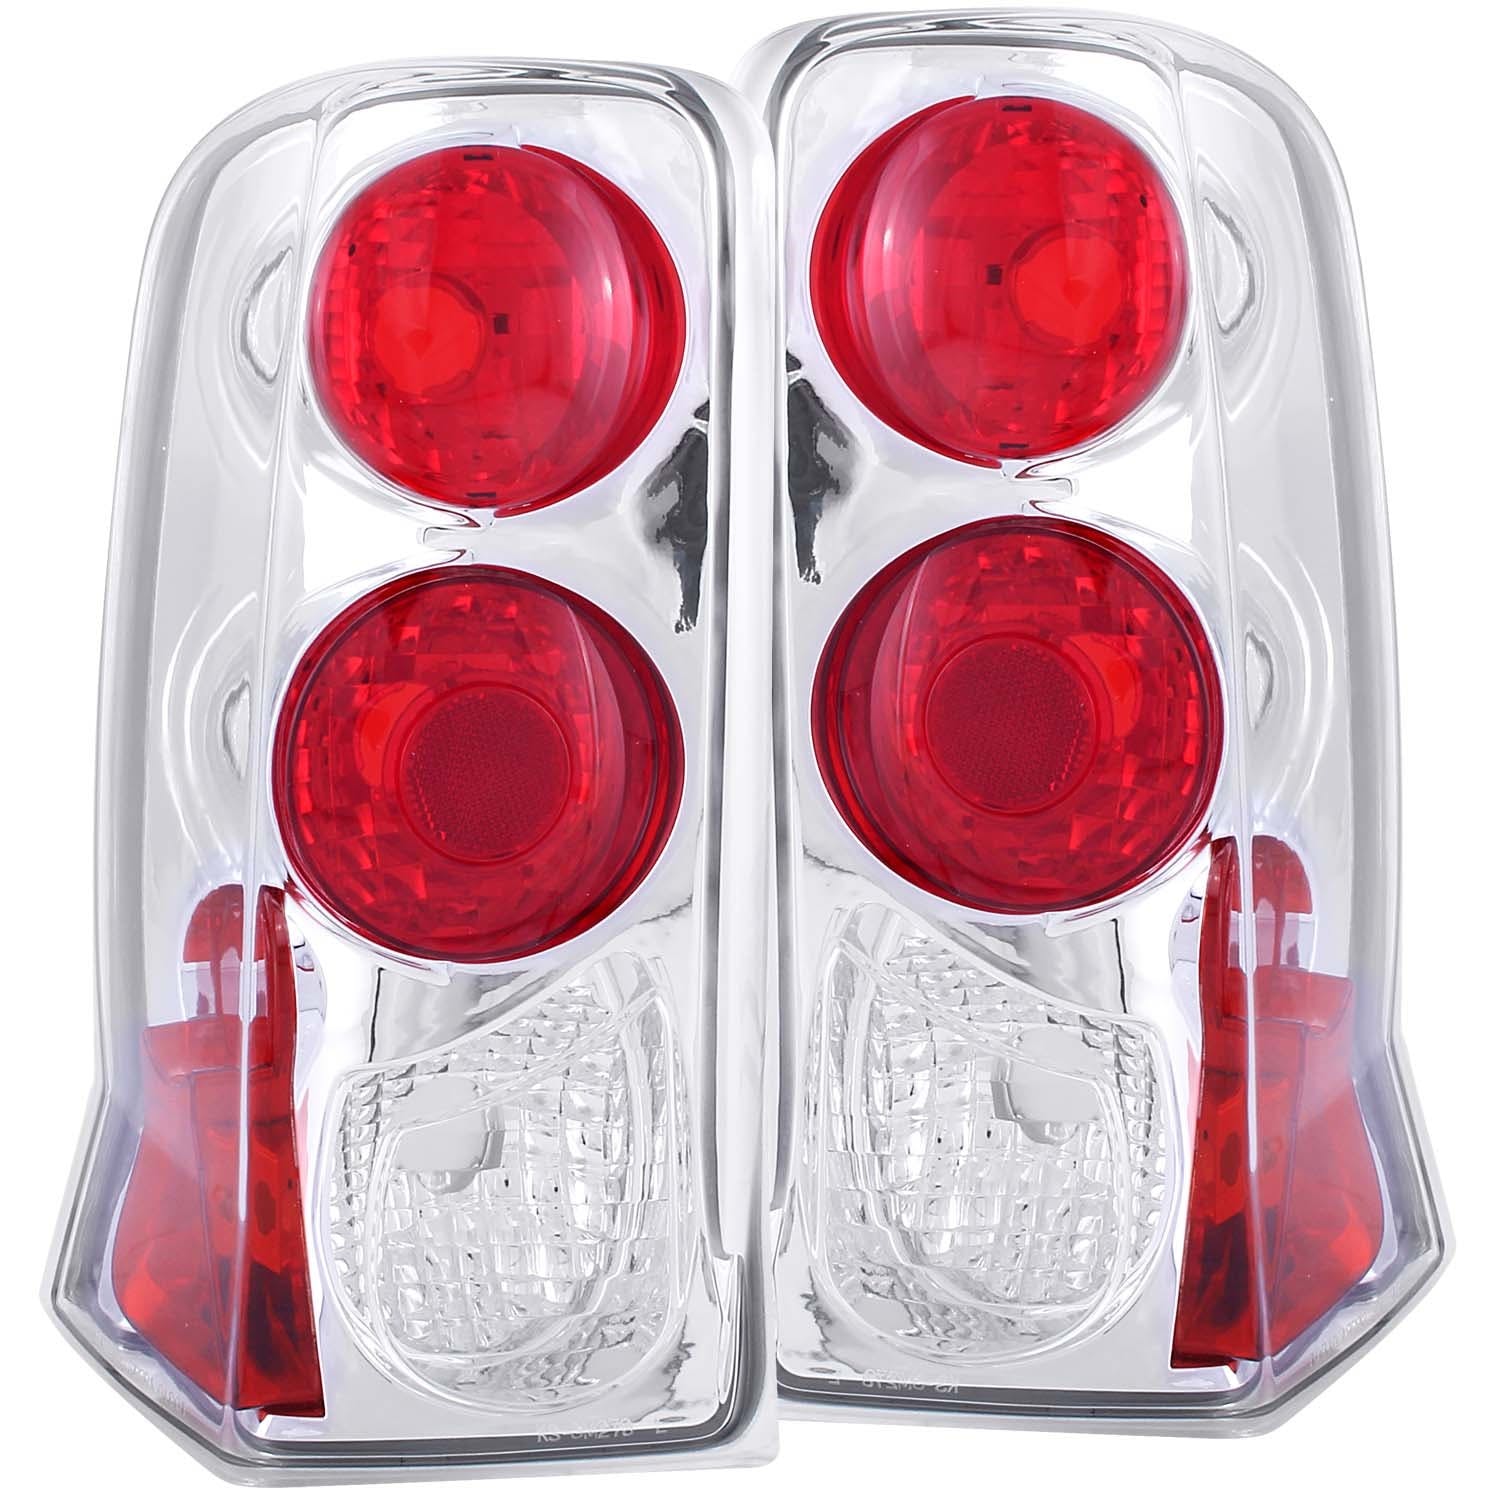 AnzoUSA 211011 Taillights Chrome